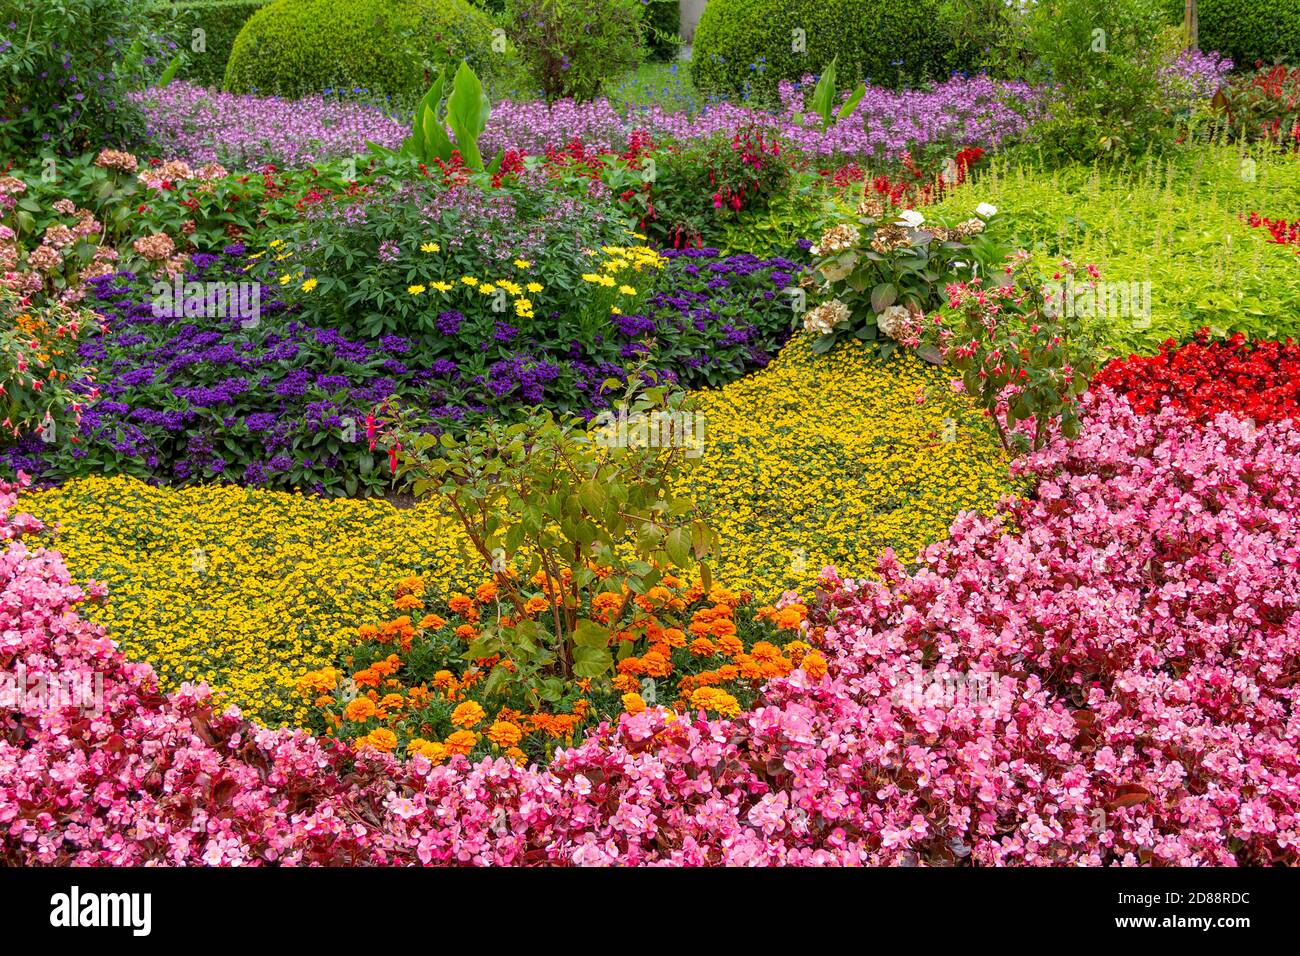 outdoor scenery showing lots of colorful flowers at summer time Stock Photo